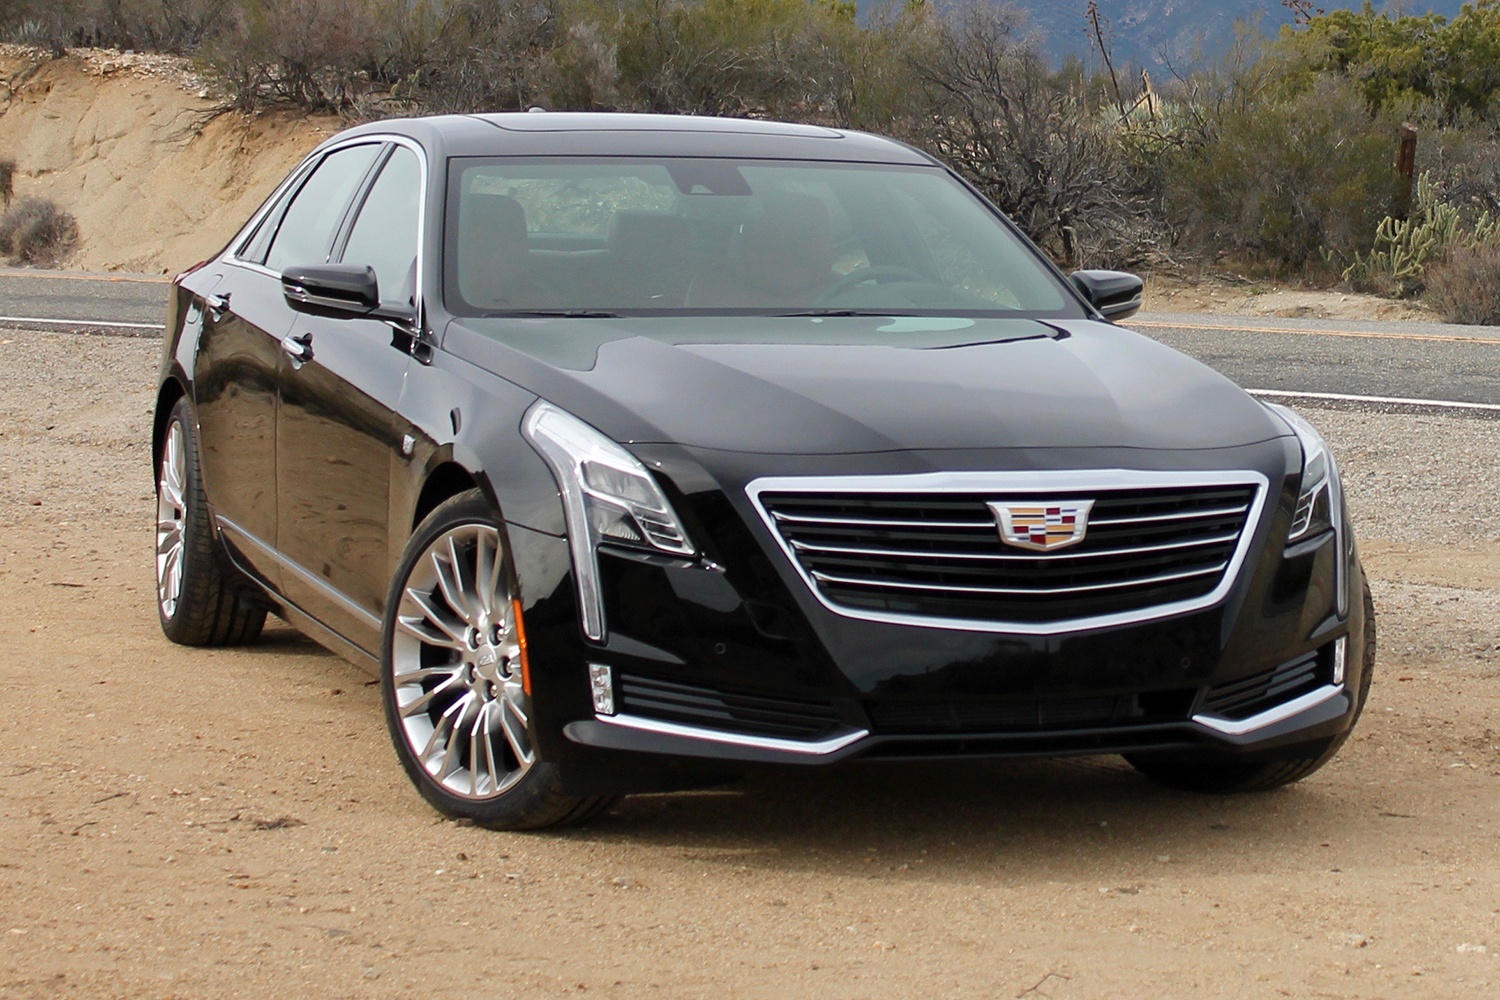 Cadillac is Returning to Business as Usual